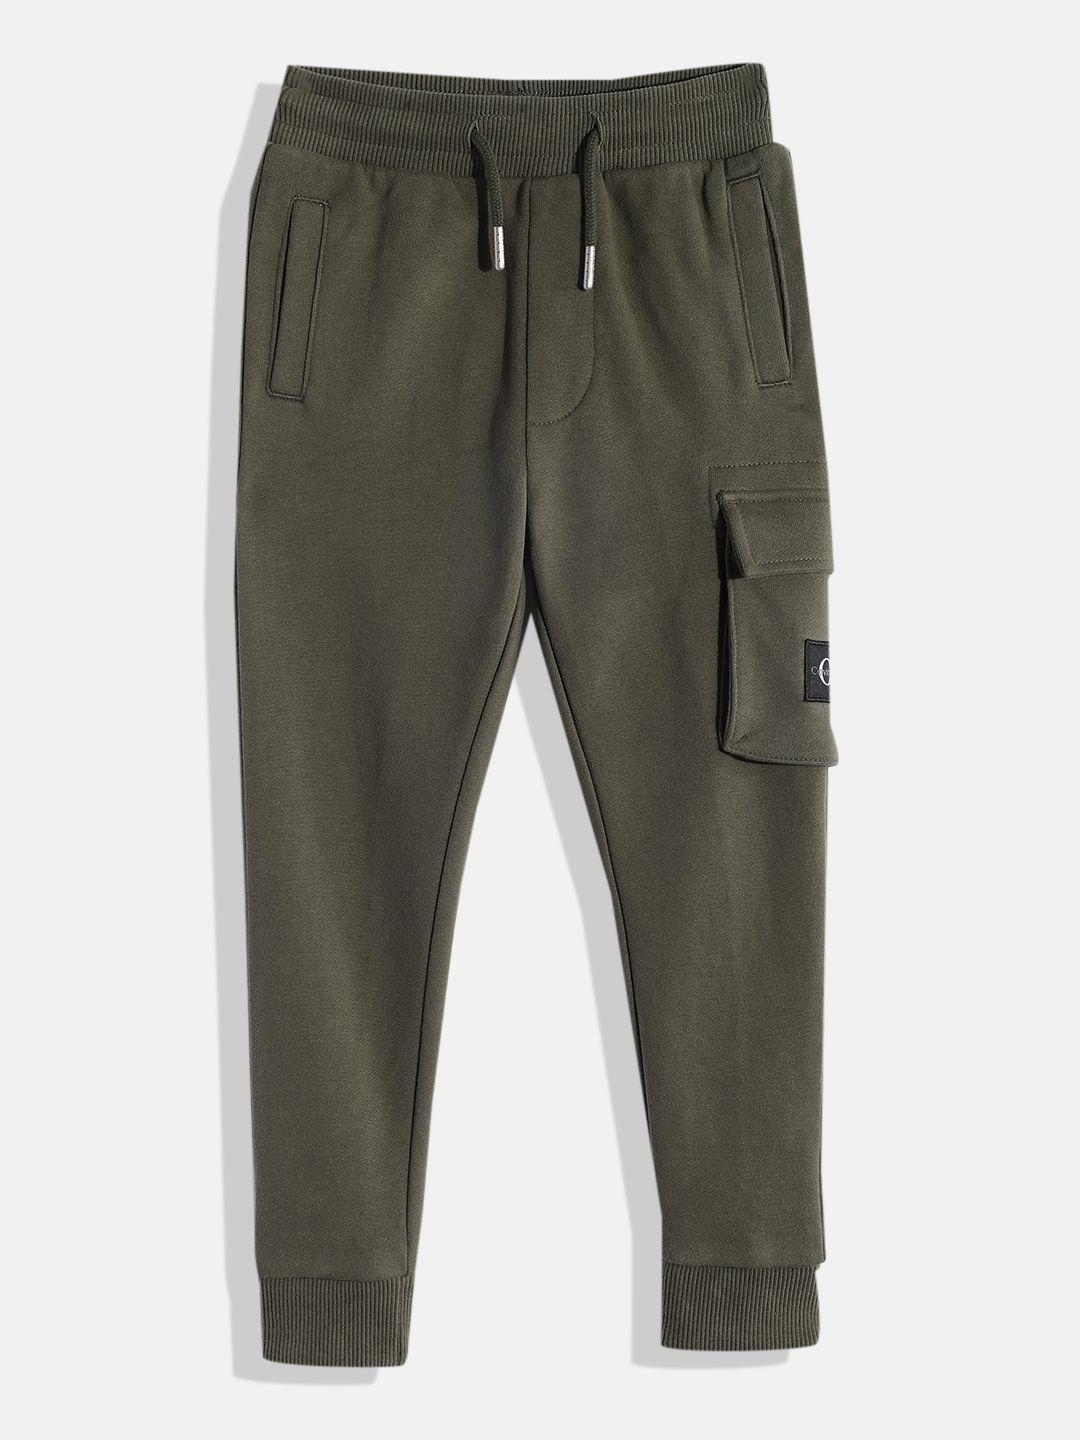 calvin-klein-jeans-boys-olive-green-cargo-style-joggers